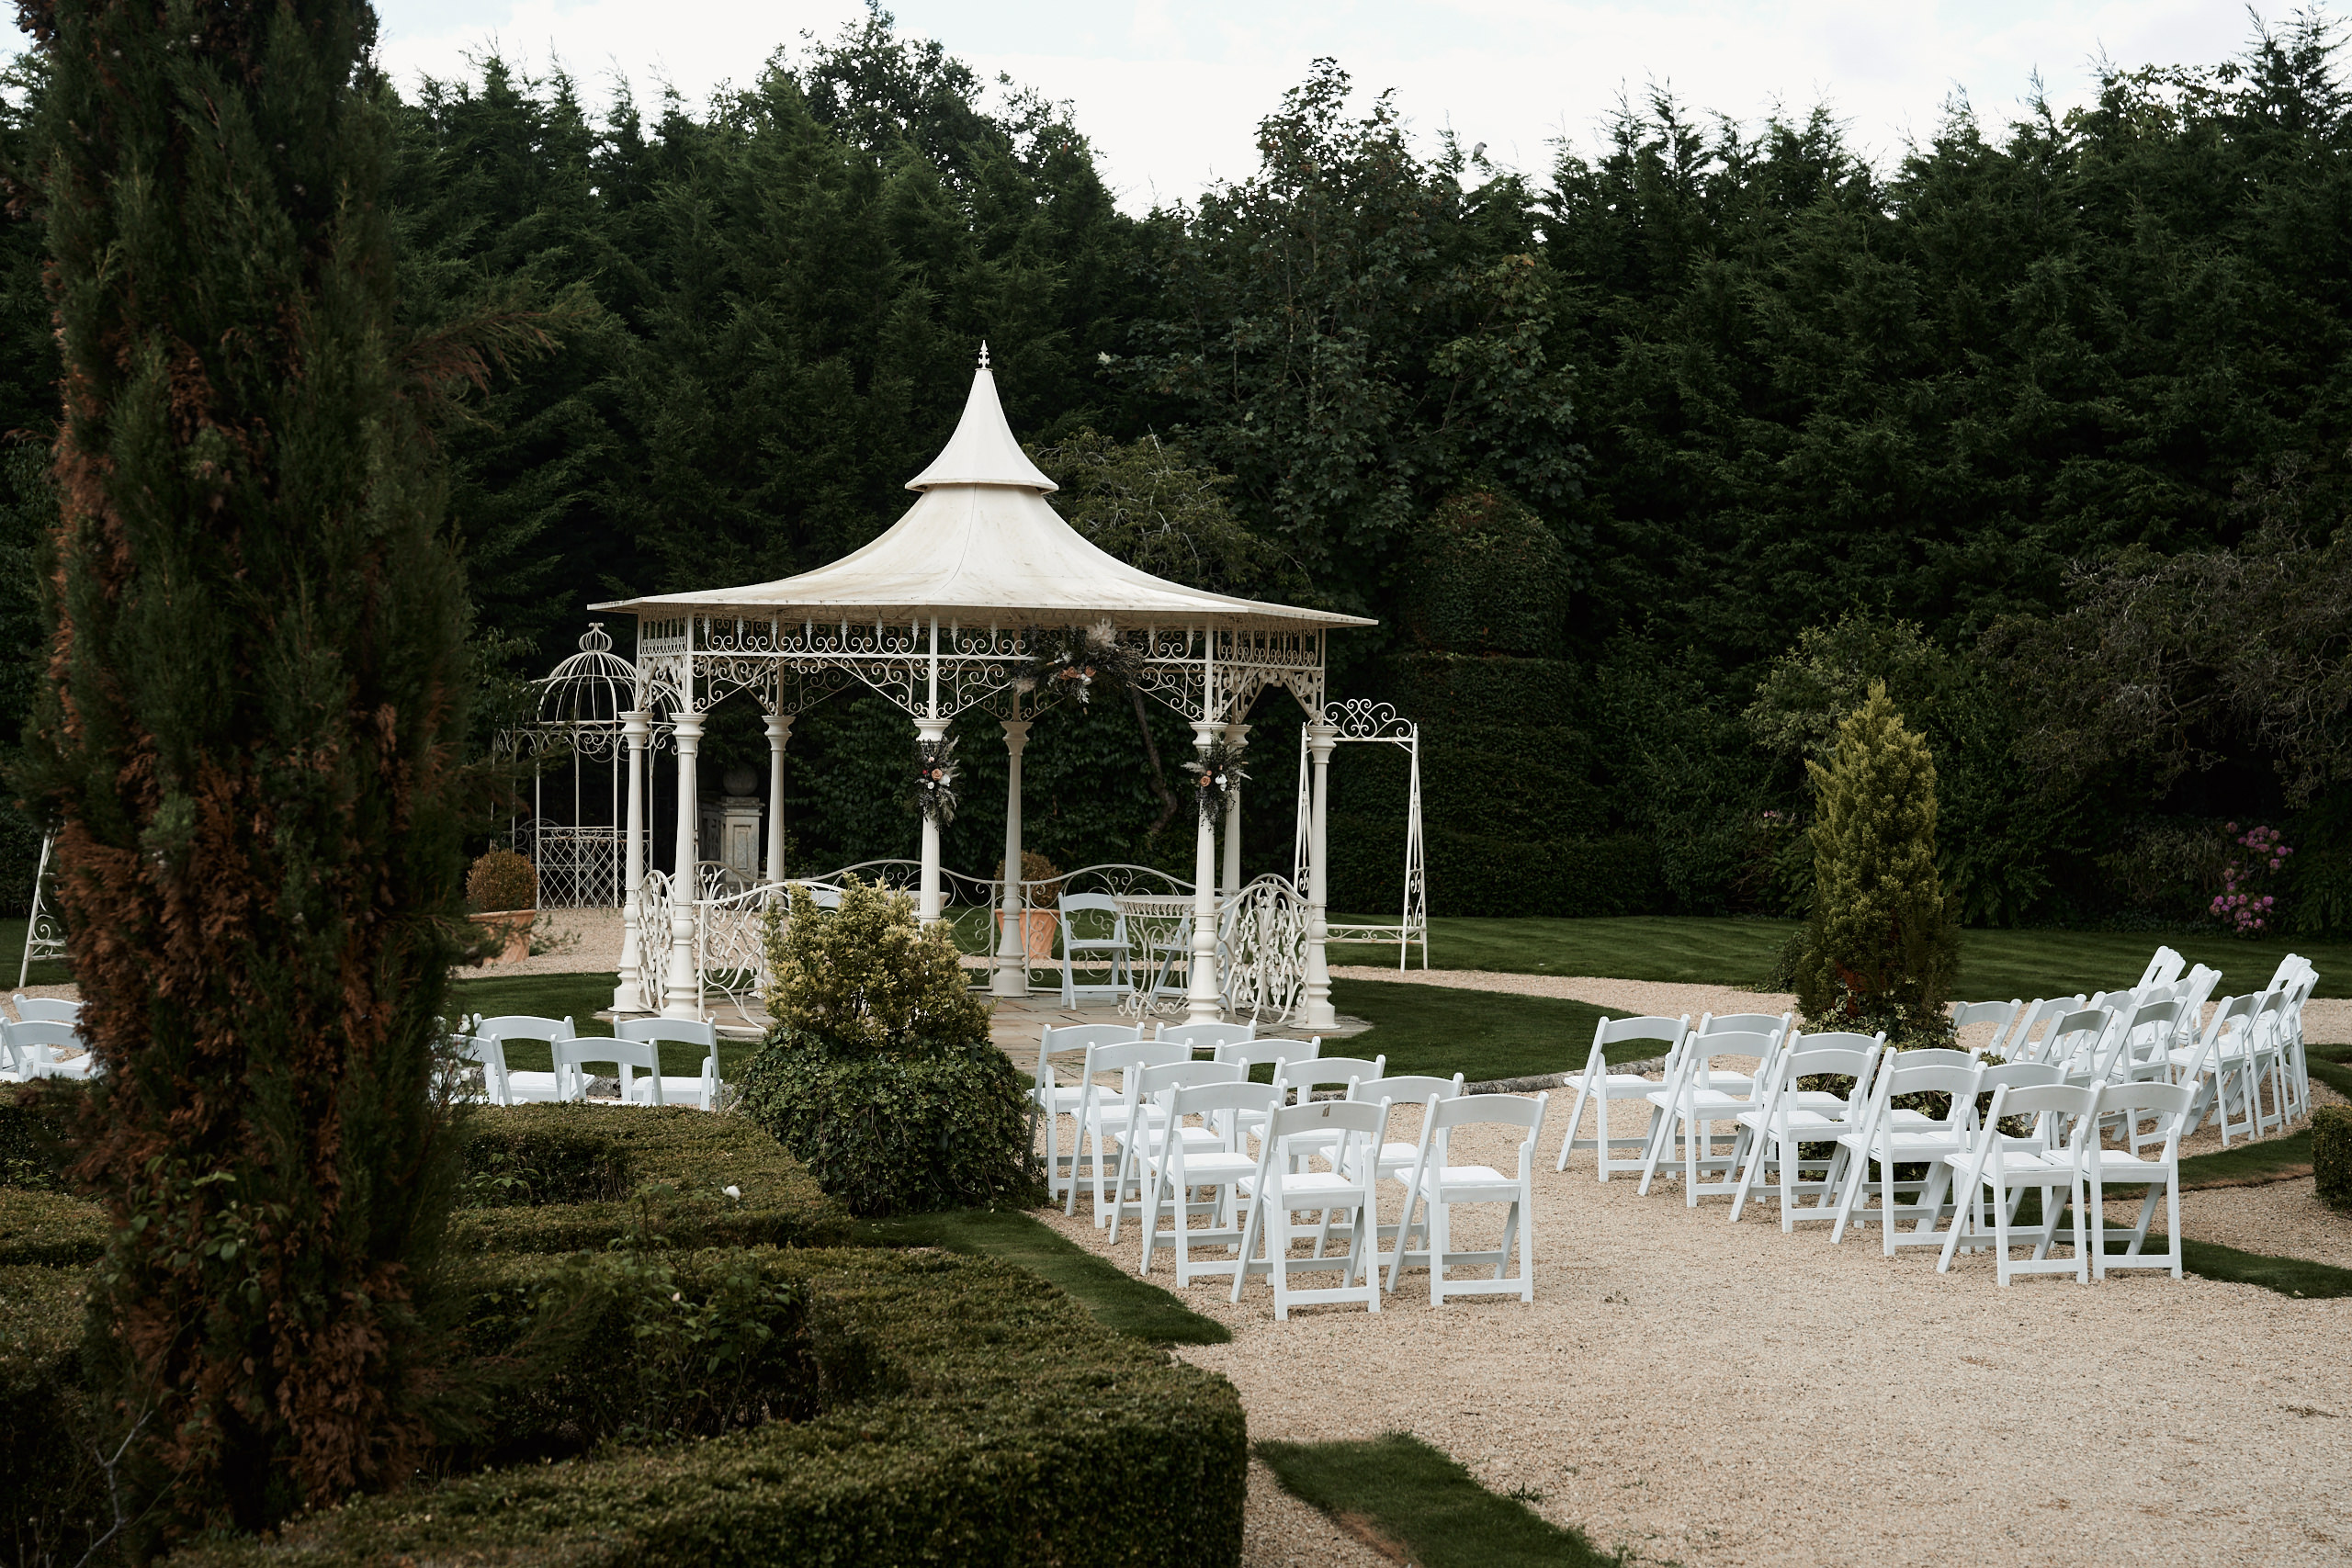 A wedding scene with white seats and a small outdoor structure.